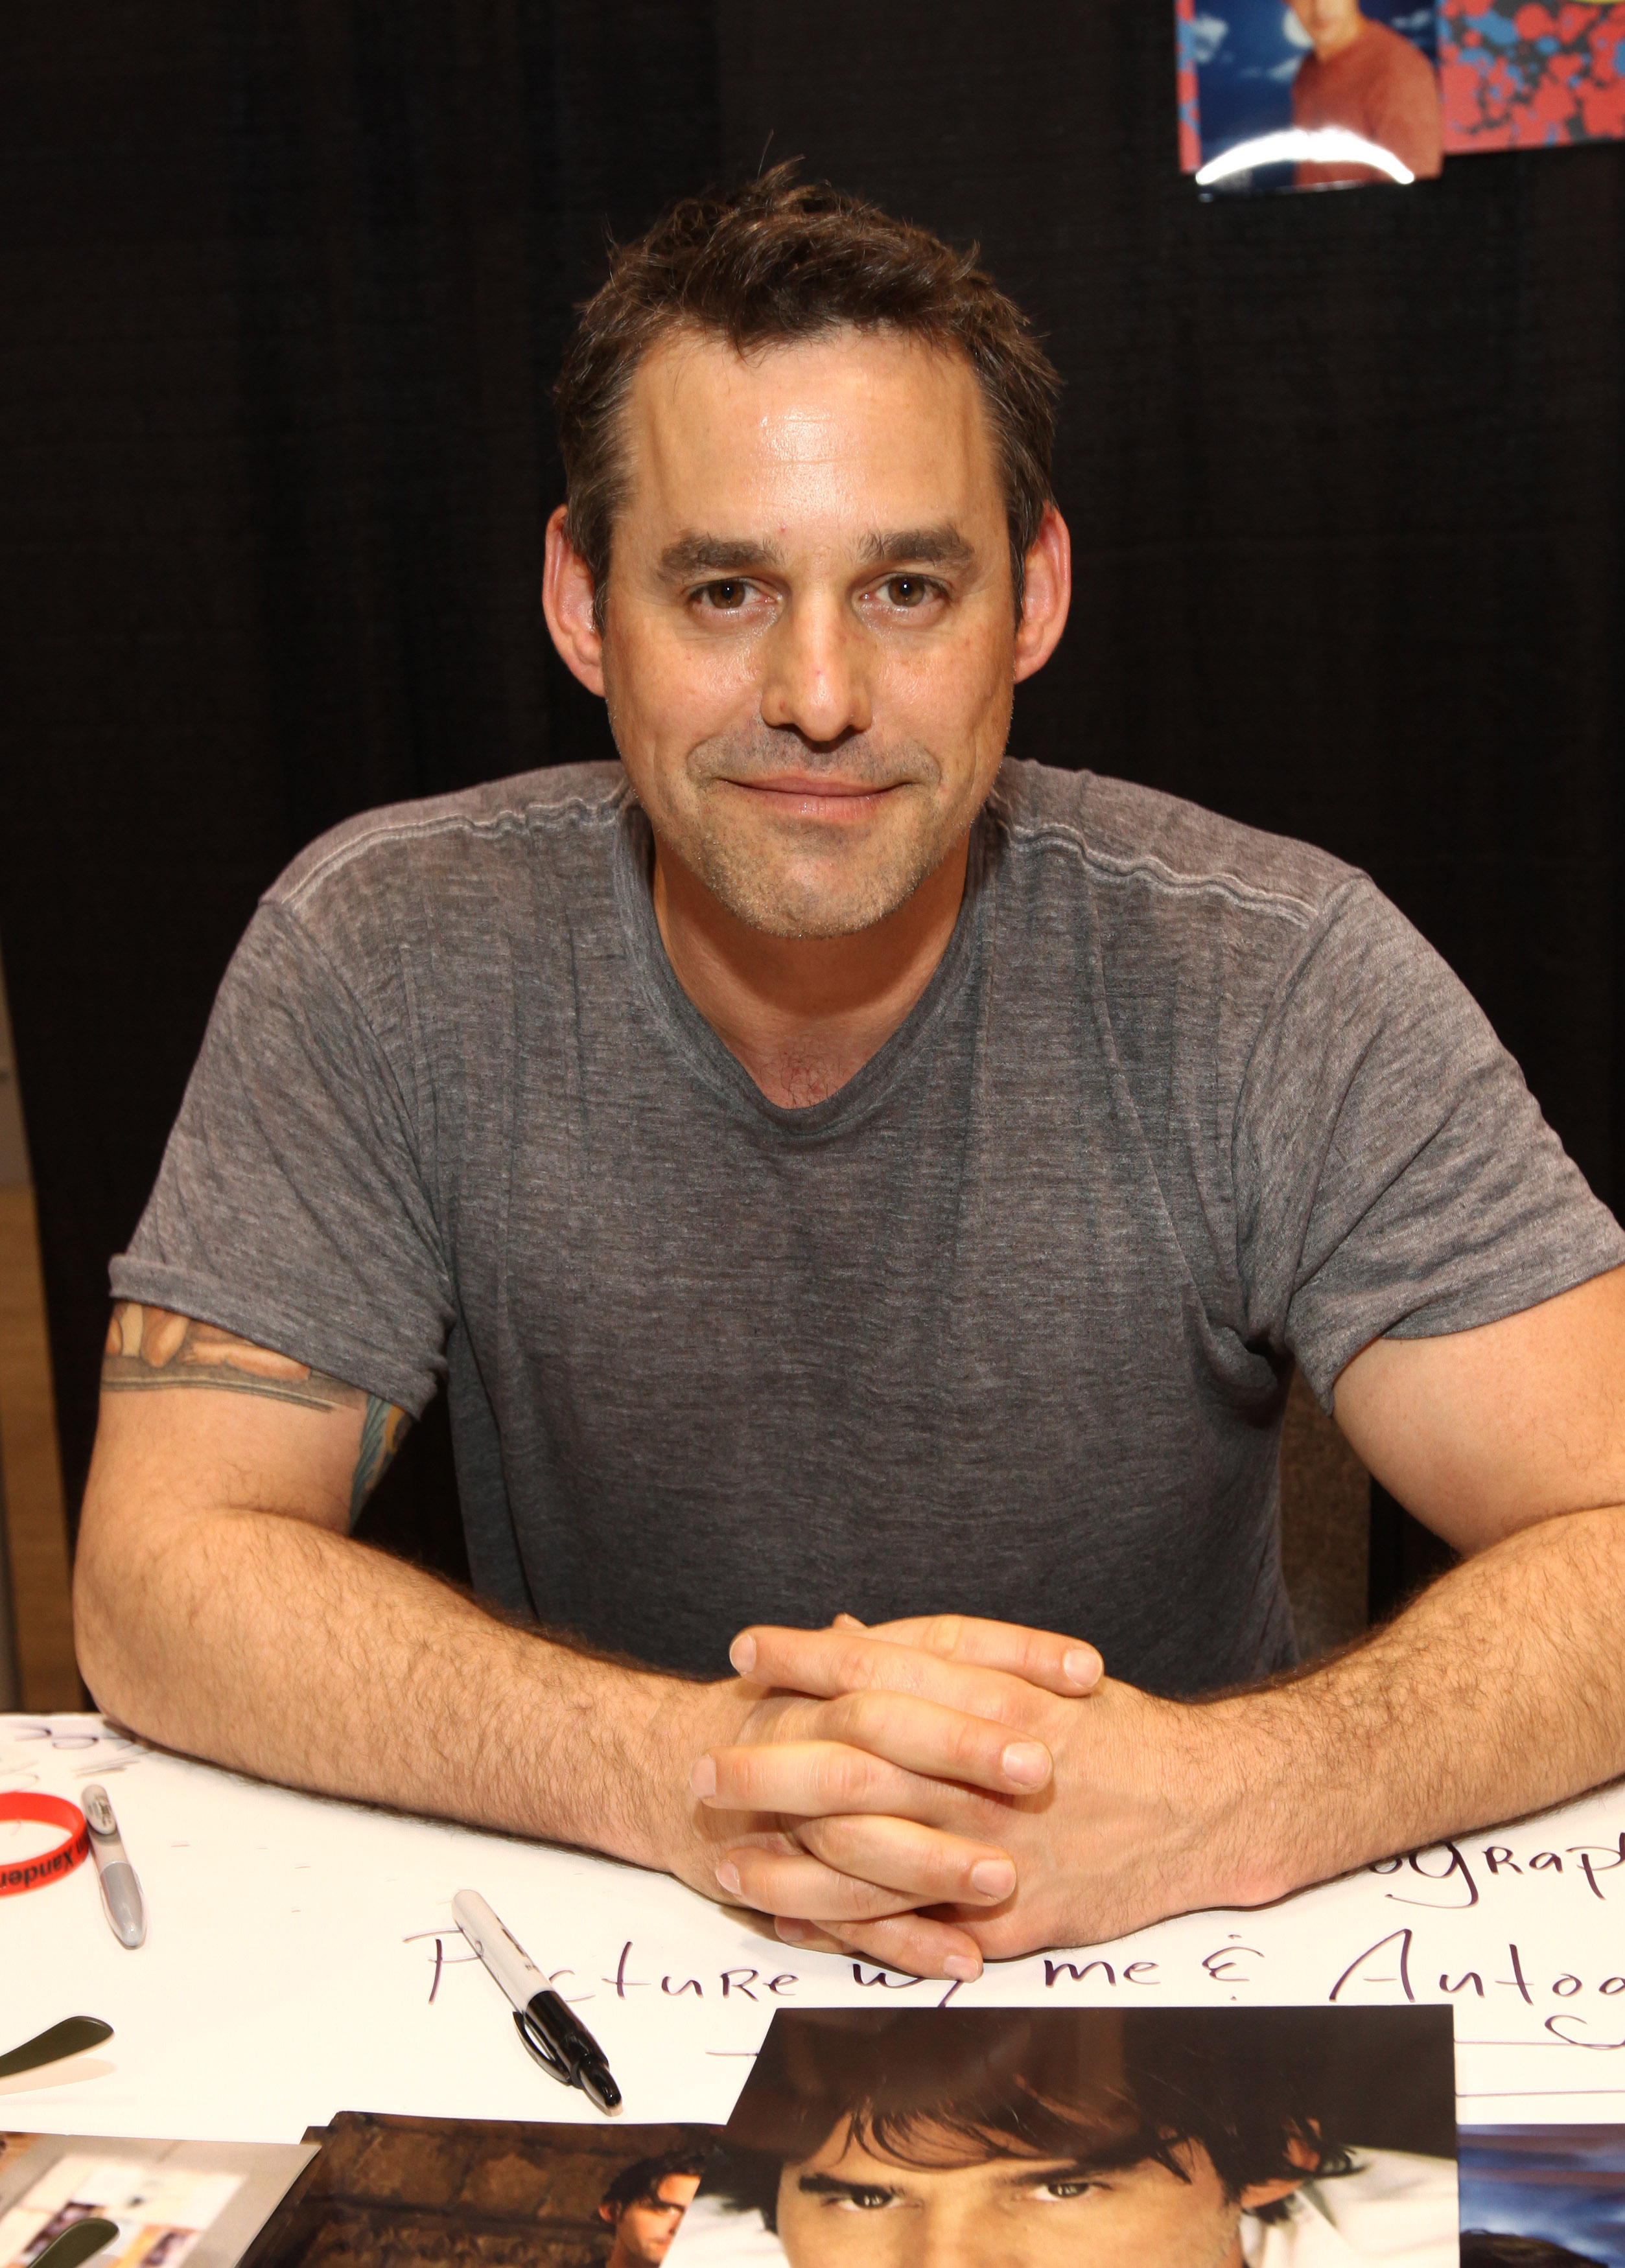 Nicholas Brendon attends the 2012 Chicago Comic and Entertainment Expo at McCormick Place on April 15, 2012 in Chicago, Illinois. 